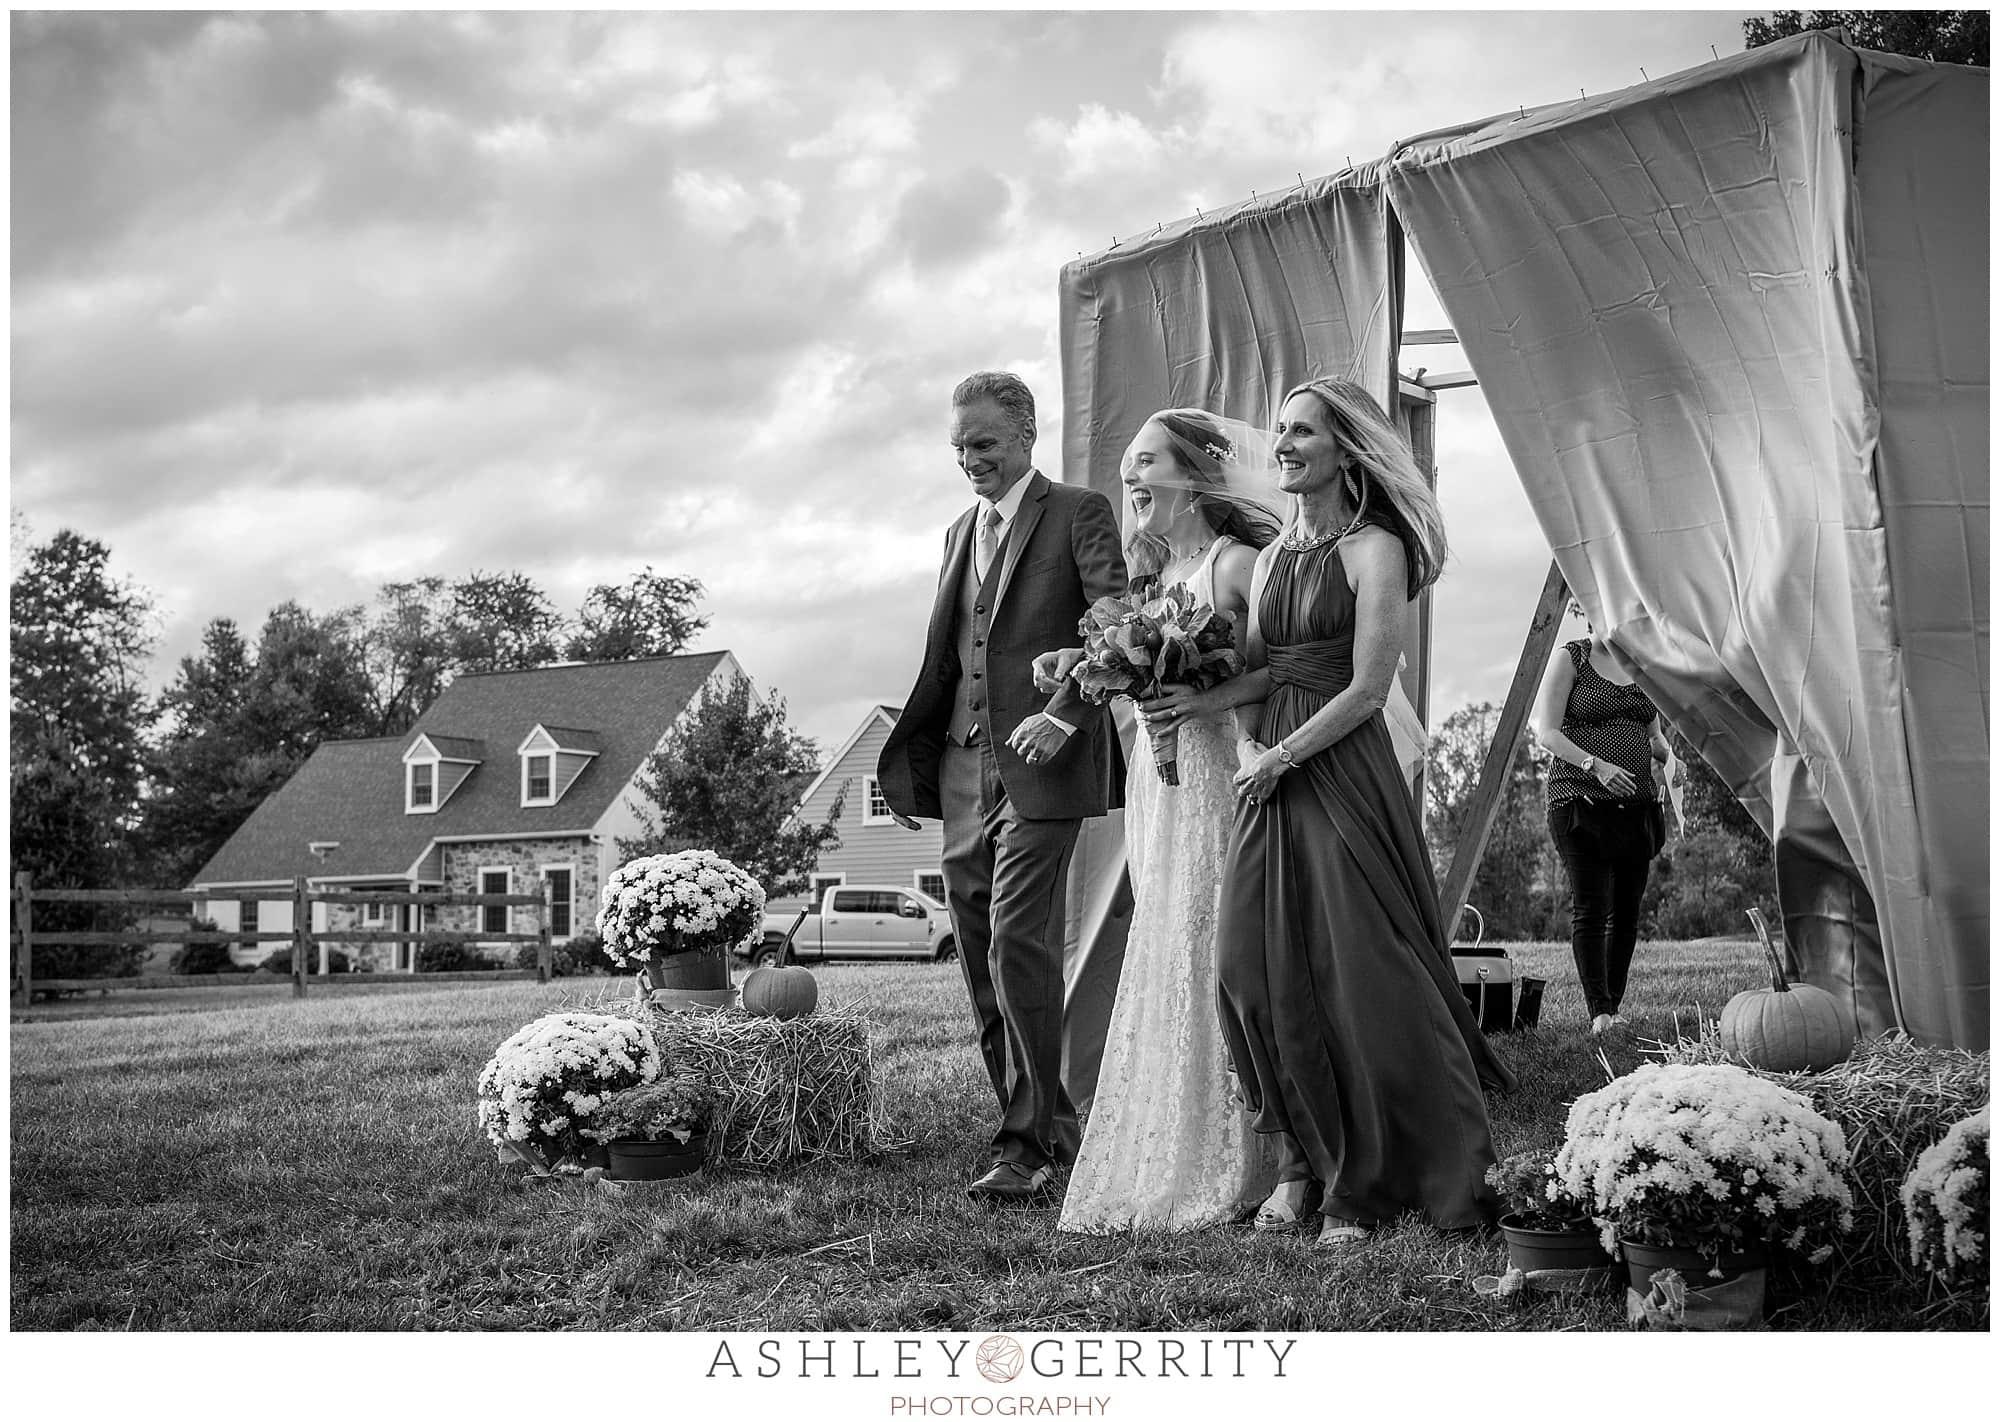 Bride walking down the aisle with her parents for her jewish wedding ceremony, through a flowing drape. Image in black & white.